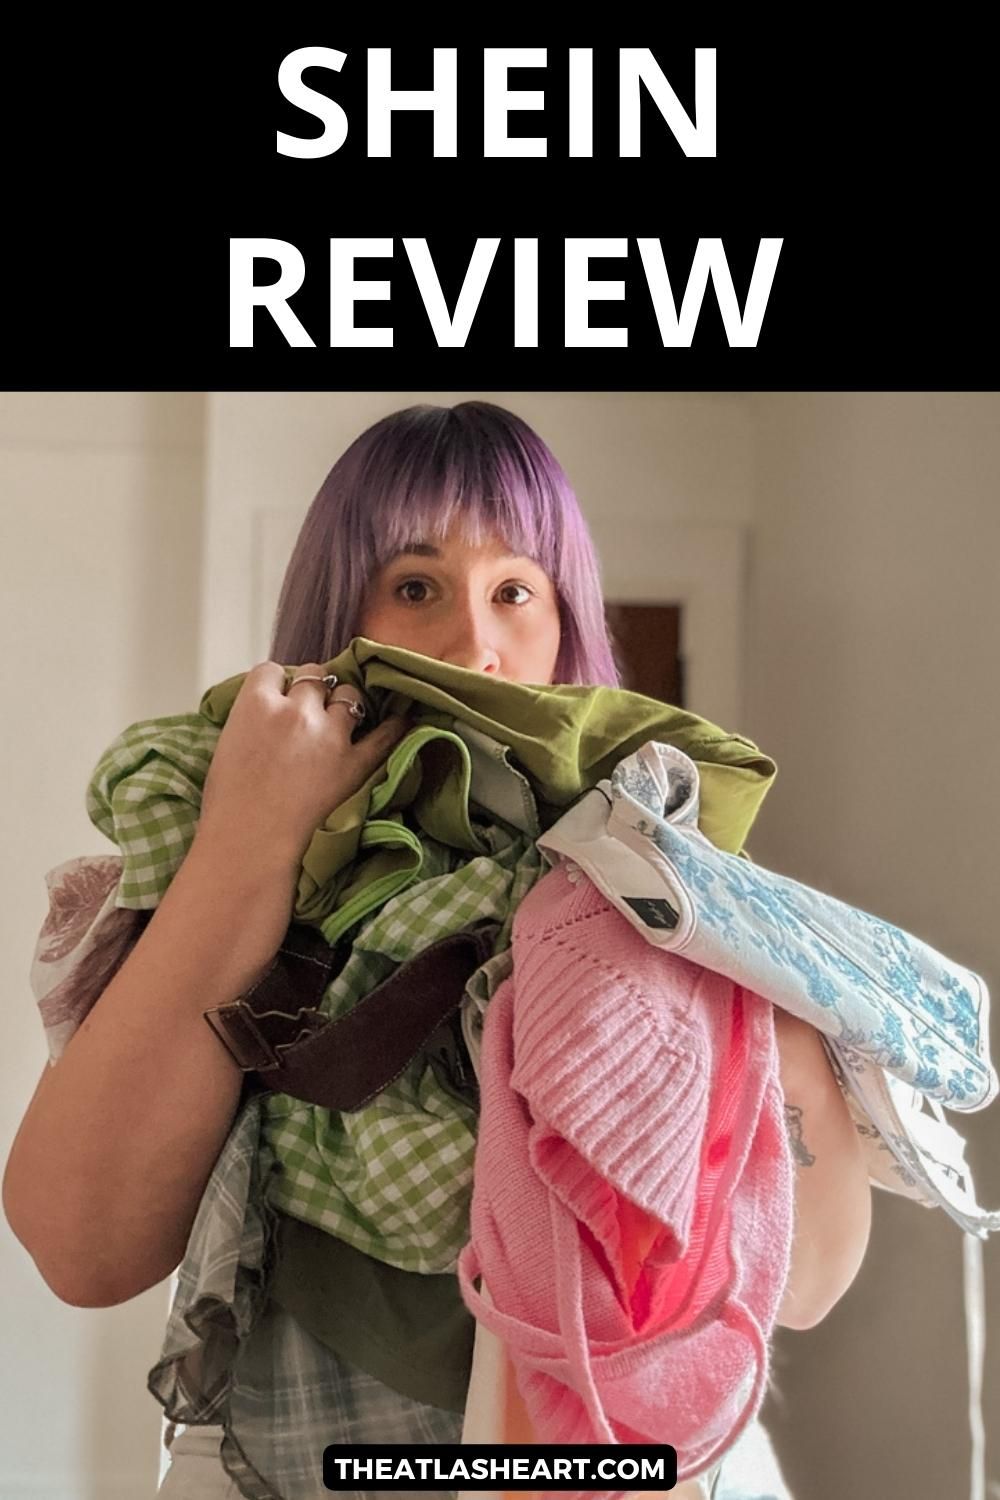 A purple-haired woman holds a pile of multi-colored clothing in a sparse interior space, with the text overlay, "Shein Review."